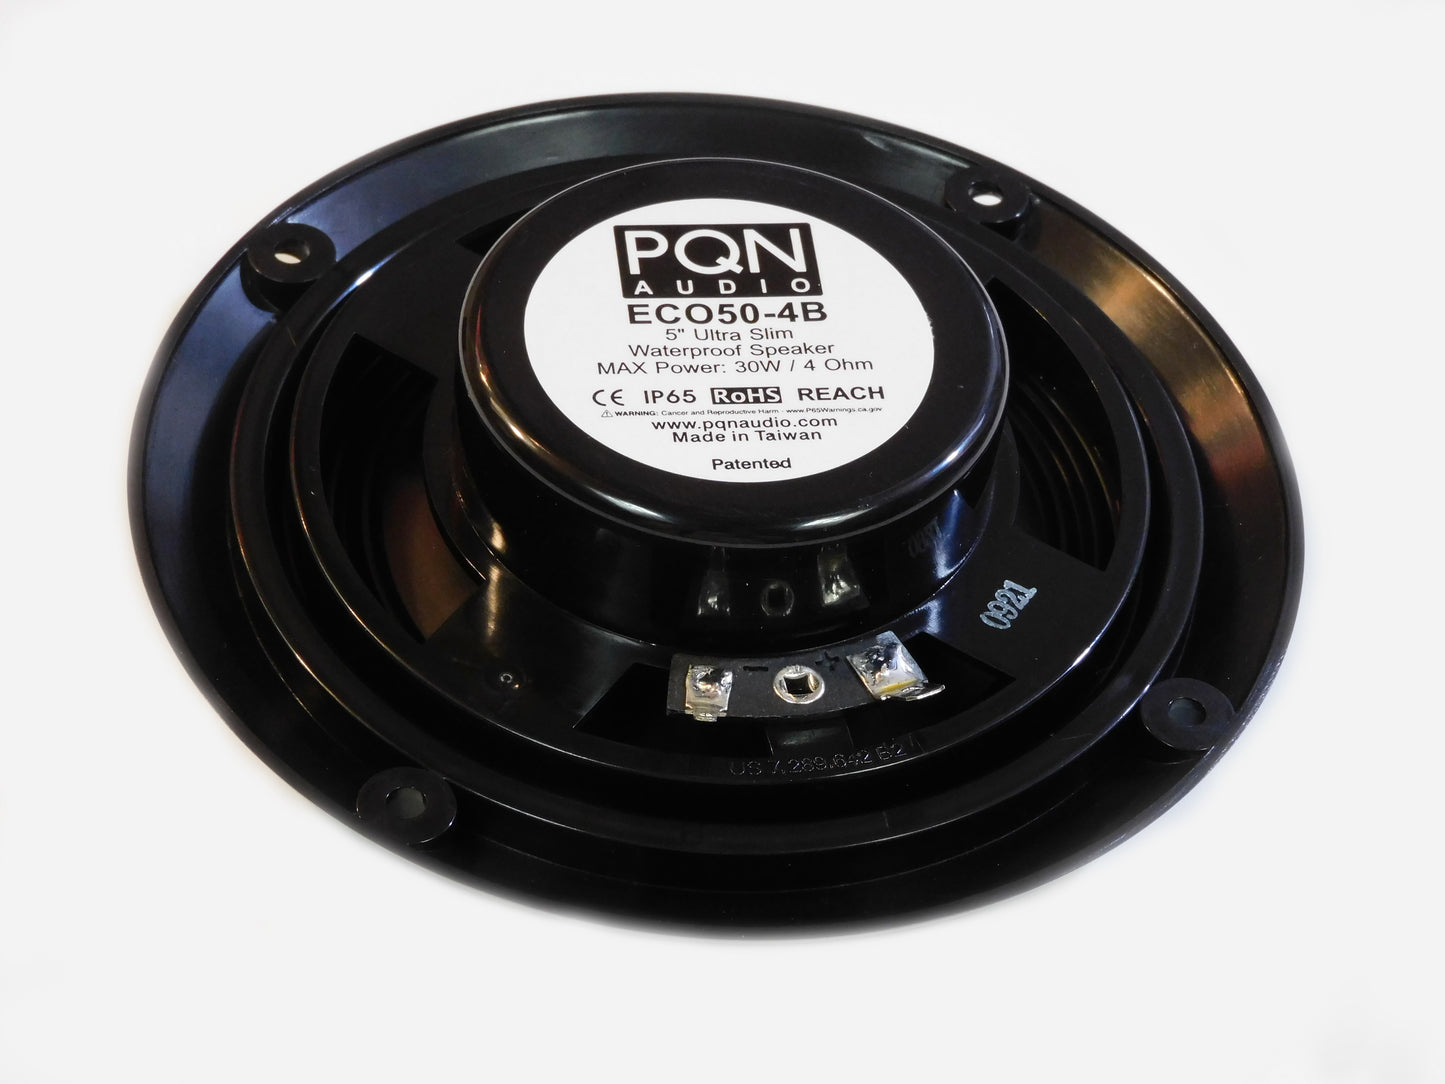 PQN Audio products are warrantied to be free of manufacturing defects for 1 year.